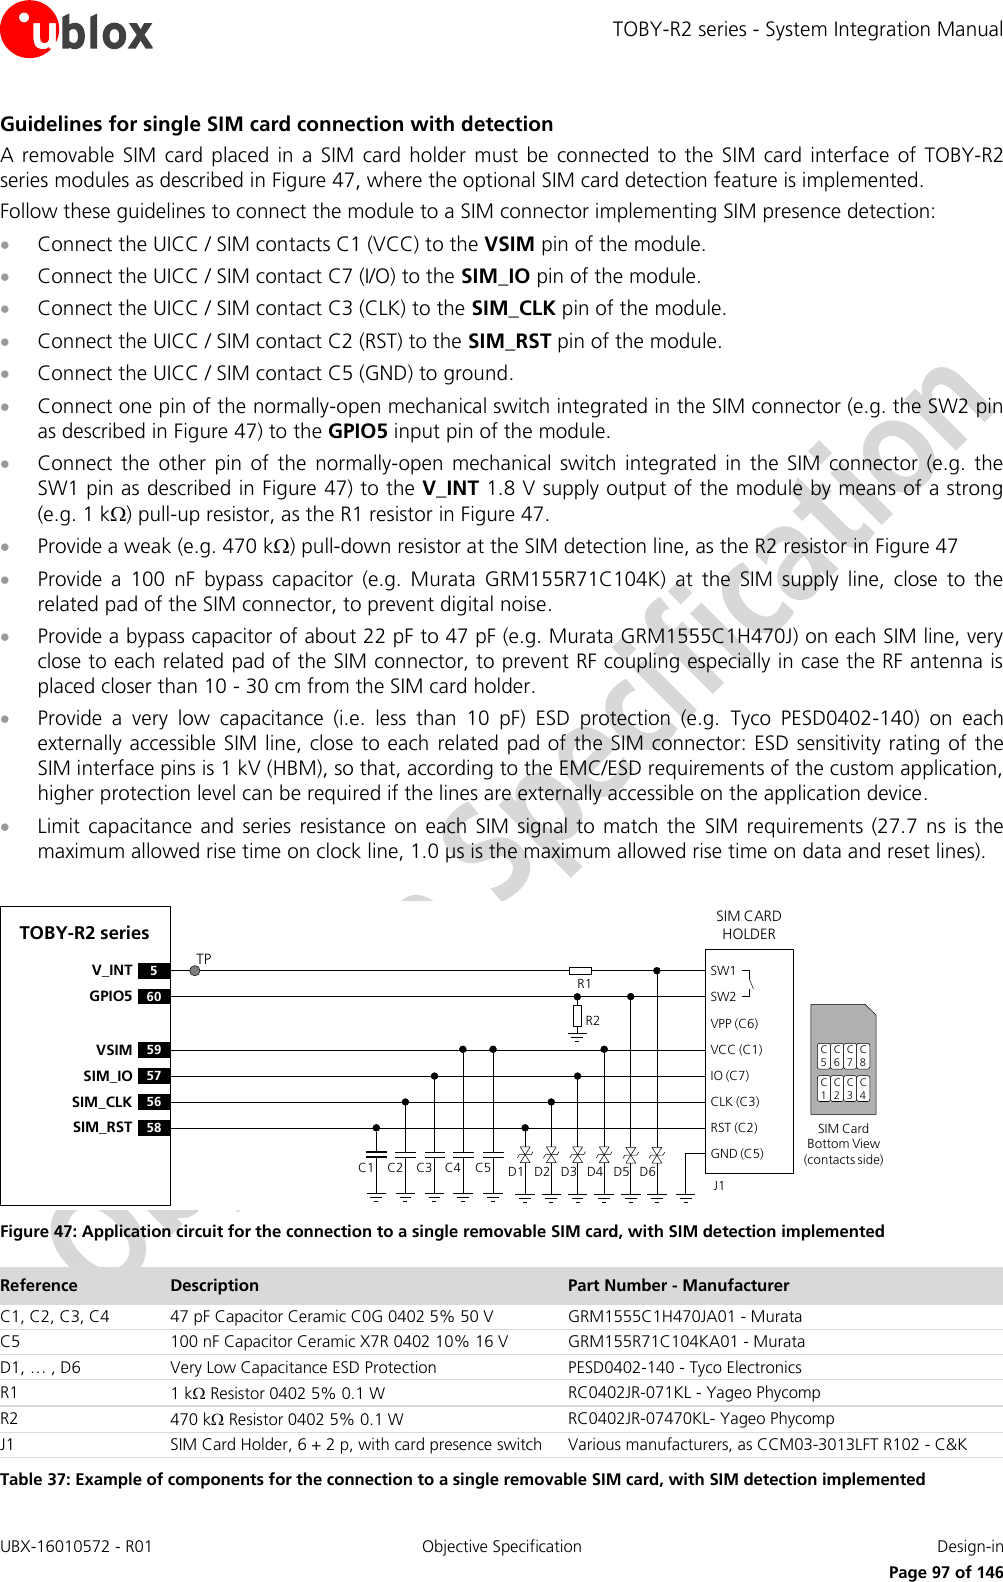 TOBY-R2 series - System Integration Manual UBX-16010572 - R01  Objective Specification  Design-in     Page 97 of 146 Guidelines for single SIM card connection with detection A removable SIM card  placed  in a  SIM card  holder  must be connected  to  the SIM card  interface  of TOBY-R2 series modules as described in Figure 47, where the optional SIM card detection feature is implemented. Follow these guidelines to connect the module to a SIM connector implementing SIM presence detection:  Connect the UICC / SIM contacts C1 (VCC) to the VSIM pin of the module.  Connect the UICC / SIM contact C7 (I/O) to the SIM_IO pin of the module.  Connect the UICC / SIM contact C3 (CLK) to the SIM_CLK pin of the module.  Connect the UICC / SIM contact C2 (RST) to the SIM_RST pin of the module.  Connect the UICC / SIM contact C5 (GND) to ground.  Connect one pin of the normally-open mechanical switch integrated in the SIM connector (e.g. the SW2 pin as described in Figure 47) to the GPIO5 input pin of the module.  Connect  the  other  pin  of  the  normally-open  mechanical  switch  integrated  in  the  SIM connector  (e.g.  the SW1 pin as described in Figure 47) to the V_INT 1.8 V supply output of the module by means of a strong (e.g. 1 k) pull-up resistor, as the R1 resistor in Figure 47.  Provide a weak (e.g. 470 k) pull-down resistor at the SIM detection line, as the R2 resistor in Figure 47  Provide  a  100  nF  bypass  capacitor  (e.g.  Murata  GRM155R71C104K)  at  the  SIM  supply  line,  close  to  the related pad of the SIM connector, to prevent digital noise.   Provide a bypass capacitor of about 22 pF to 47 pF (e.g. Murata GRM1555C1H470J) on each SIM line, very close to each related pad of the SIM connector, to prevent RF coupling especially in case the RF antenna is placed closer than 10 - 30 cm from the SIM card holder.  Provide  a  very  low  capacitance  (i.e.  less  than  10  pF)  ESD  protection  (e.g.  Tyco  PESD0402-140)  on  each externally accessible SIM line, close to each  related pad of the SIM connector: ESD sensitivity rating of the SIM interface pins is 1 kV (HBM), so that, according to the EMC/ESD requirements of the custom application, higher protection level can be required if the lines are externally accessible on the application device.  Limit capacitance  and  series resistance  on each  SIM  signal to  match the  SIM  requirements  (27.7  ns is the maximum allowed rise time on clock line, 1.0 µs is the maximum allowed rise time on data and reset lines).  TOBY-R2 series5V_INT60GPIO5SIM CARD HOLDERC5C6C7C1C2C3SIM Card Bottom View (contacts side)C1VPP (C6)VCC (C1)IO (C7)CLK (C3)RST (C2)GND (C5)C2 C3 C5J1C4SW1SW2D1 D2 D3 D4 D5 D6R2R1C8C4TP59VSIM57SIM_IO56SIM_CLK58SIM_RST Figure 47: Application circuit for the connection to a single removable SIM card, with SIM detection implemented Reference Description Part Number - Manufacturer C1, C2, C3, C4 47 pF Capacitor Ceramic C0G 0402 5% 50 V GRM1555C1H470JA01 - Murata C5 100 nF Capacitor Ceramic X7R 0402 10% 16 V GRM155R71C104KA01 - Murata D1, … , D6 Very Low Capacitance ESD Protection PESD0402-140 - Tyco Electronics  R1 1 k Resistor 0402 5% 0.1 W RC0402JR-071KL - Yageo Phycomp R2 470 k Resistor 0402 5% 0.1 W RC0402JR-07470KL- Yageo Phycomp J1 SIM Card Holder, 6 + 2 p, with card presence switch Various manufacturers, as CCM03-3013LFT R102 - C&amp;K  Table 37: Example of components for the connection to a single removable SIM card, with SIM detection implemented 